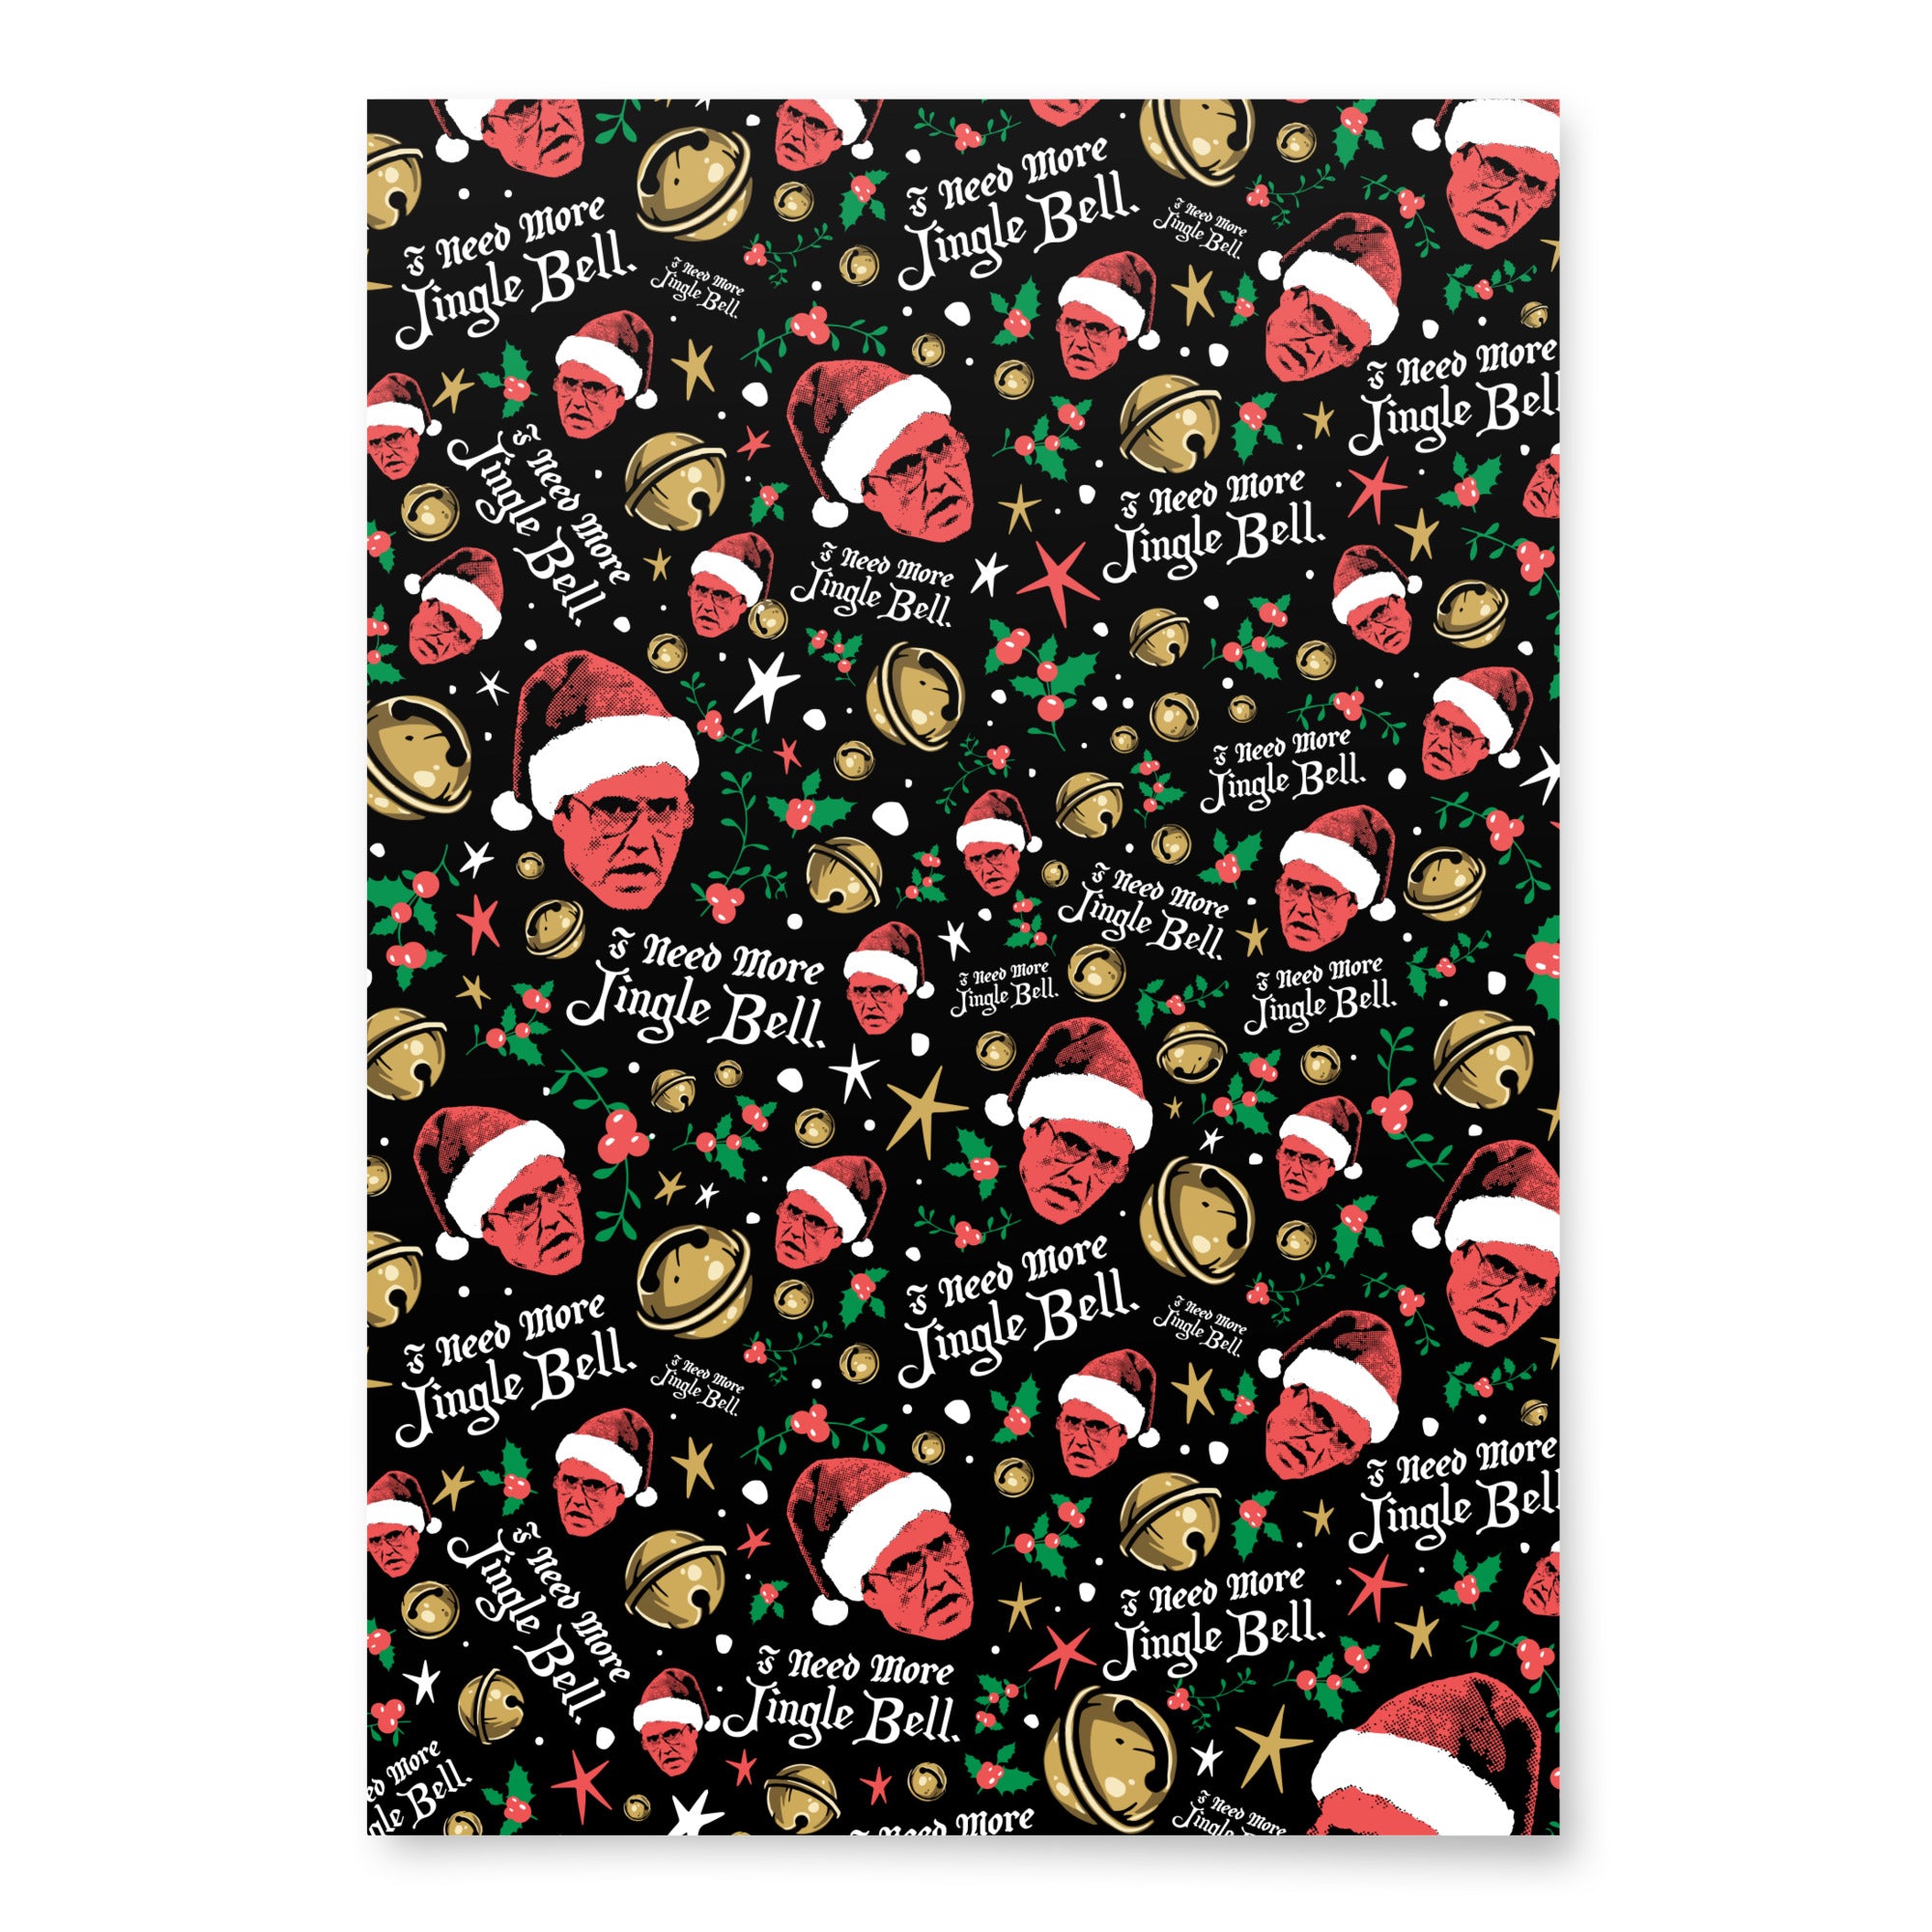 I Need More Jingle Bell - Wrapping Paper Sheets (3)